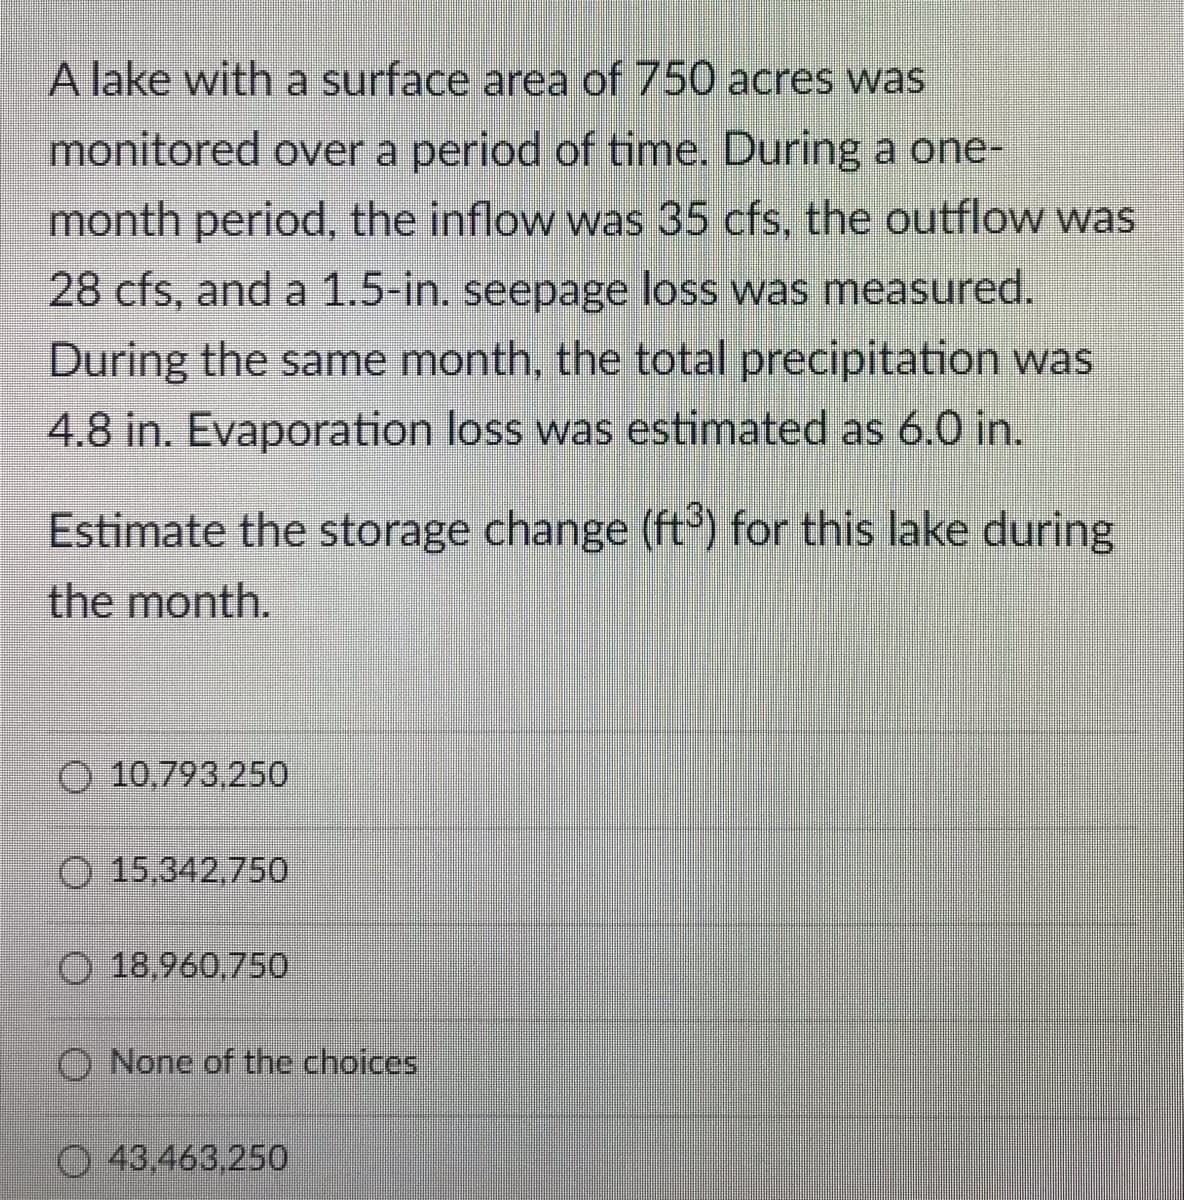 A lake with a surface area of 750 acres was
monitored over a period of time. During a one-
month period, the inflow was 35 cfs, the outflow was
28 cfs, and a 1.5-in. seepage loss was measured.
During the same month, the total precipitation was
4.8 in. Evaporation loss was estimated as 6.0 in.
Estimate the storage change (ft) for this lake during
the month.
O 10,793,250
O 15,342,750
O 18,960,750
O None of the choices
43,463,250
